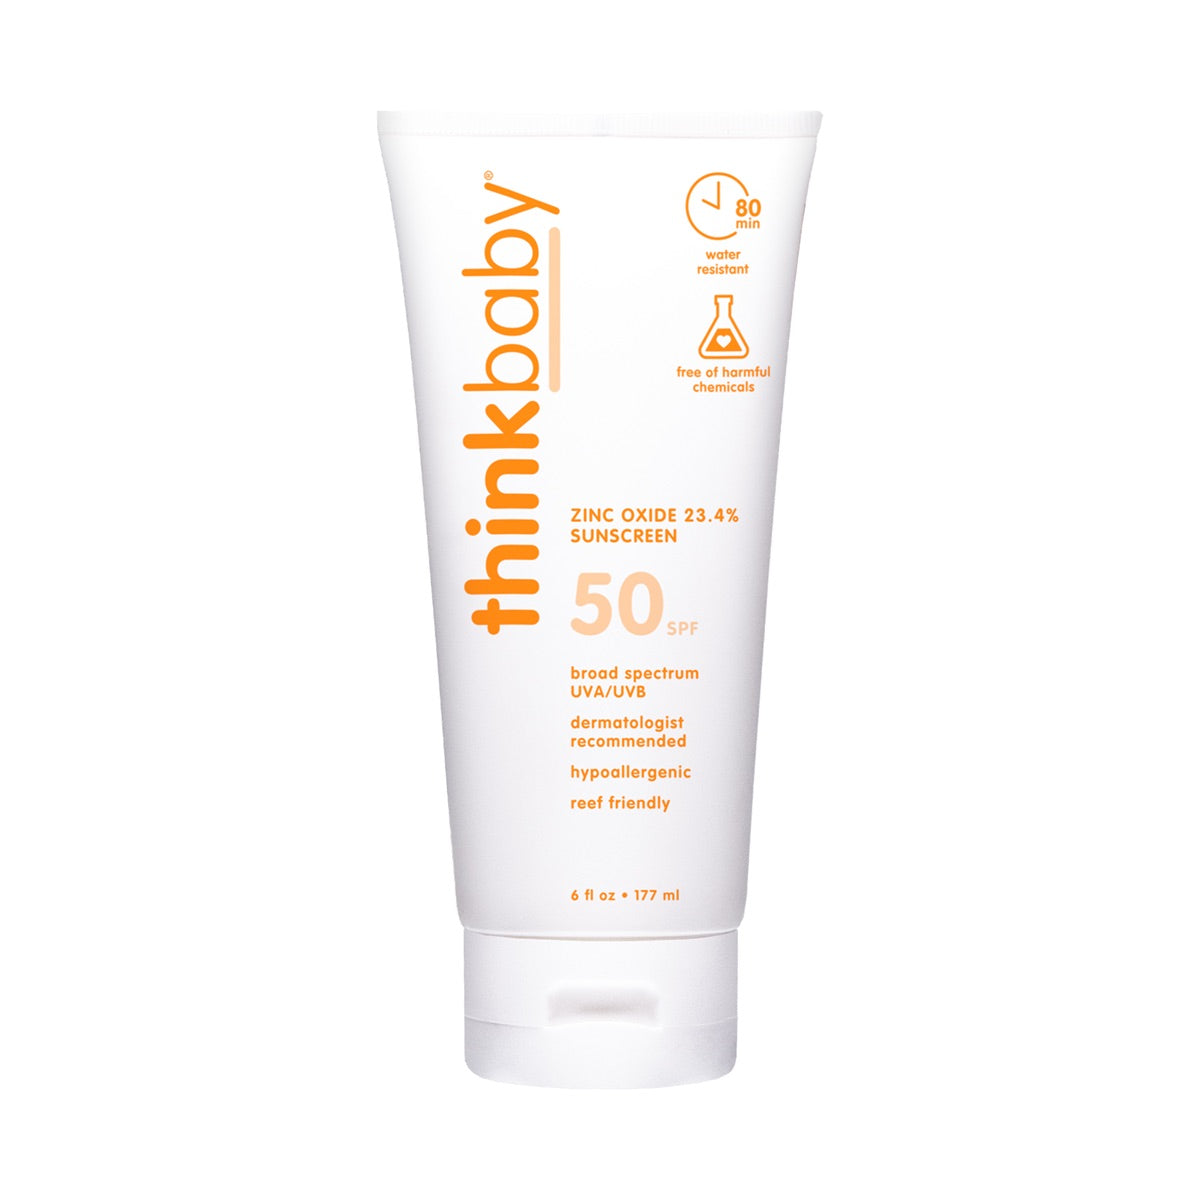 A single Thinkbaby Safe Sunscreen SPF 50+ (6oz) - Family Size   tube with broad-spectrum SPF 50, dermatologist recommended, hypoallergenic, and reef-friendly, against a plain white background.